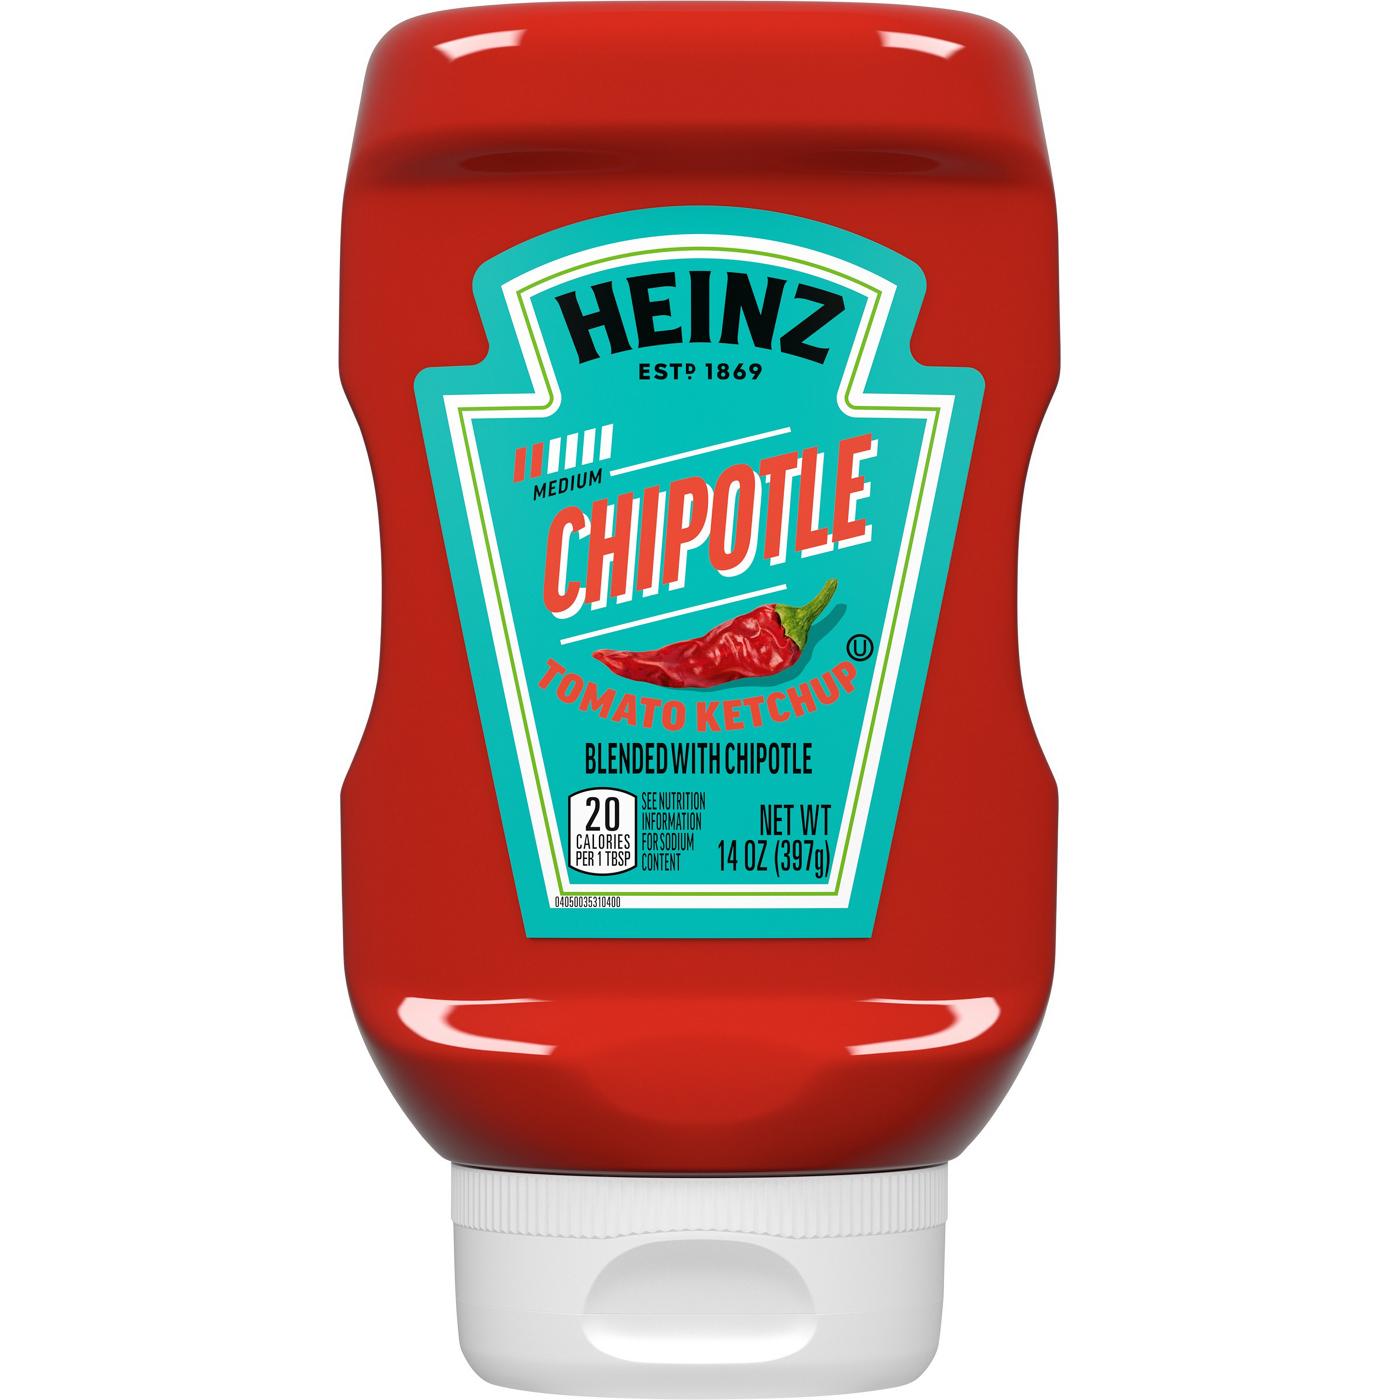 Heinz Chipotle Spicy Ketchup; image 2 of 3